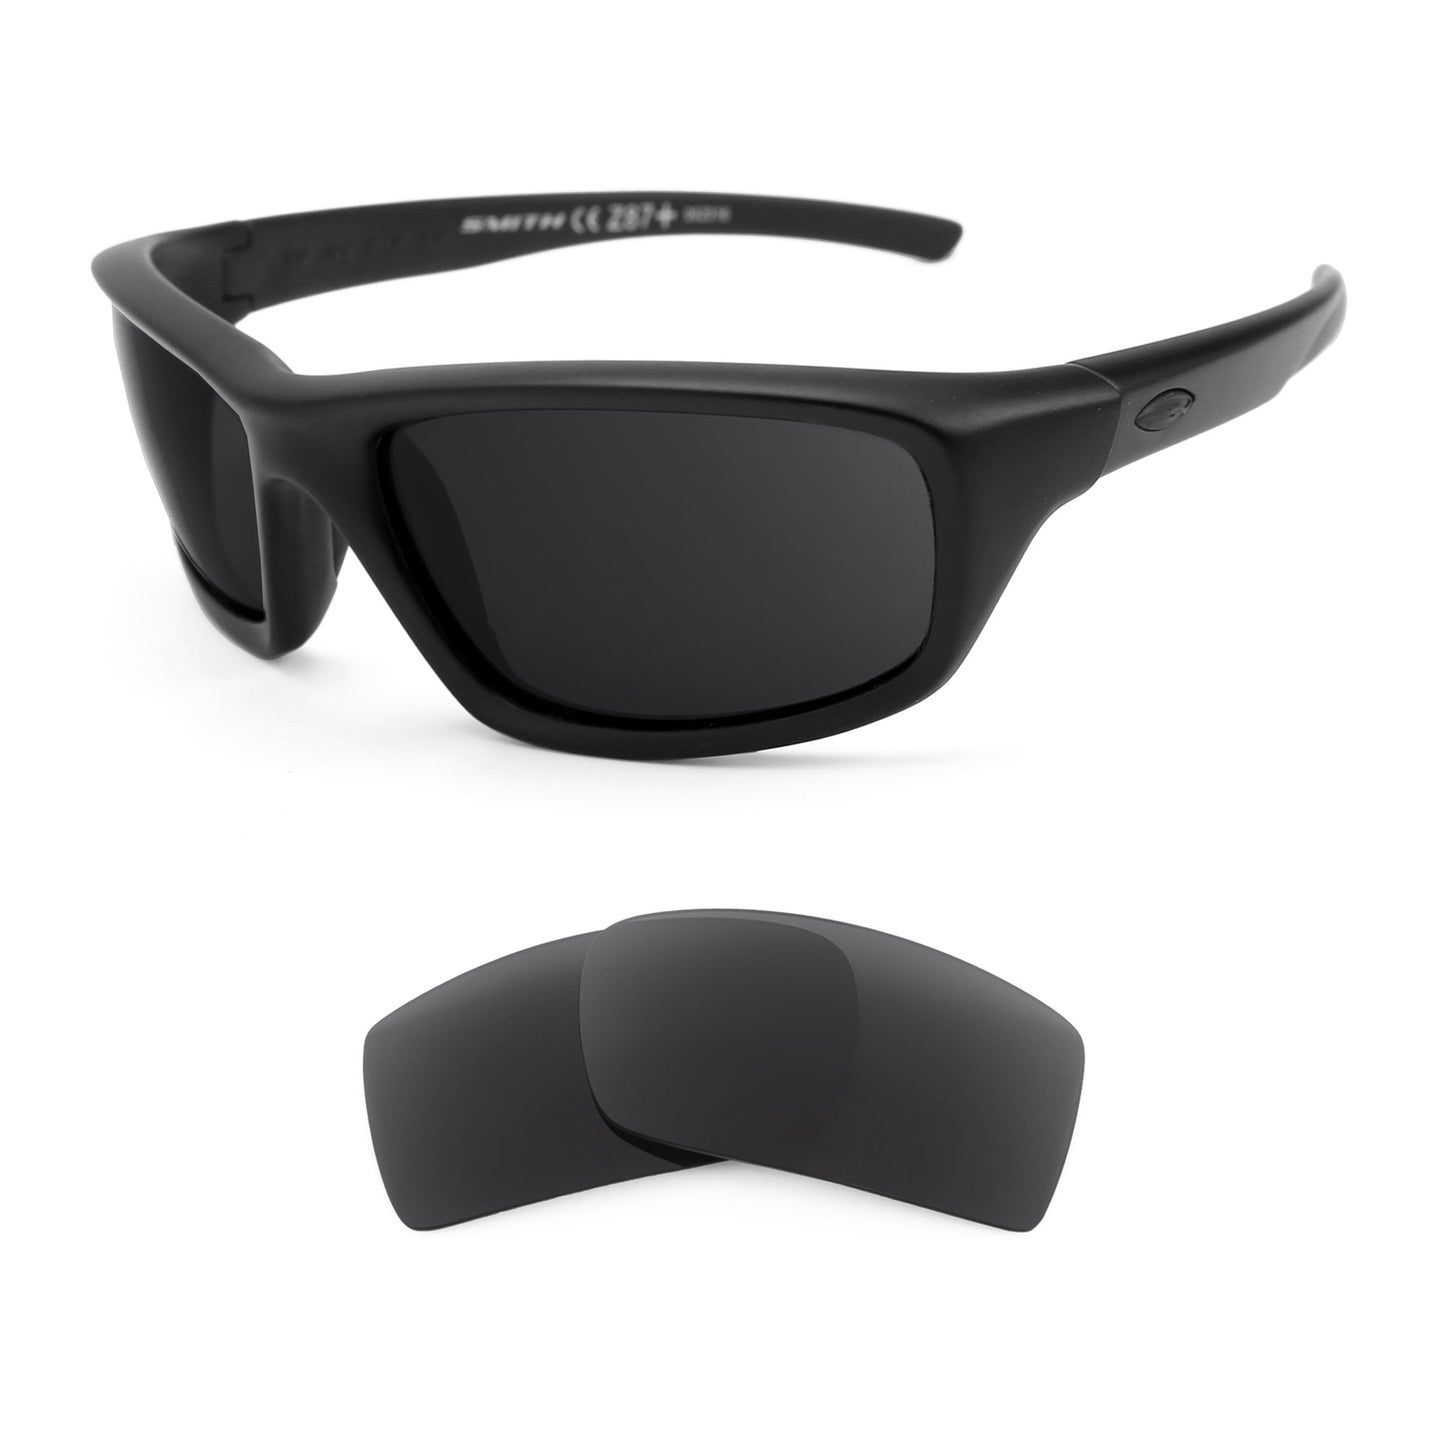 Smith Director Elite sunglasses with replacement lenses